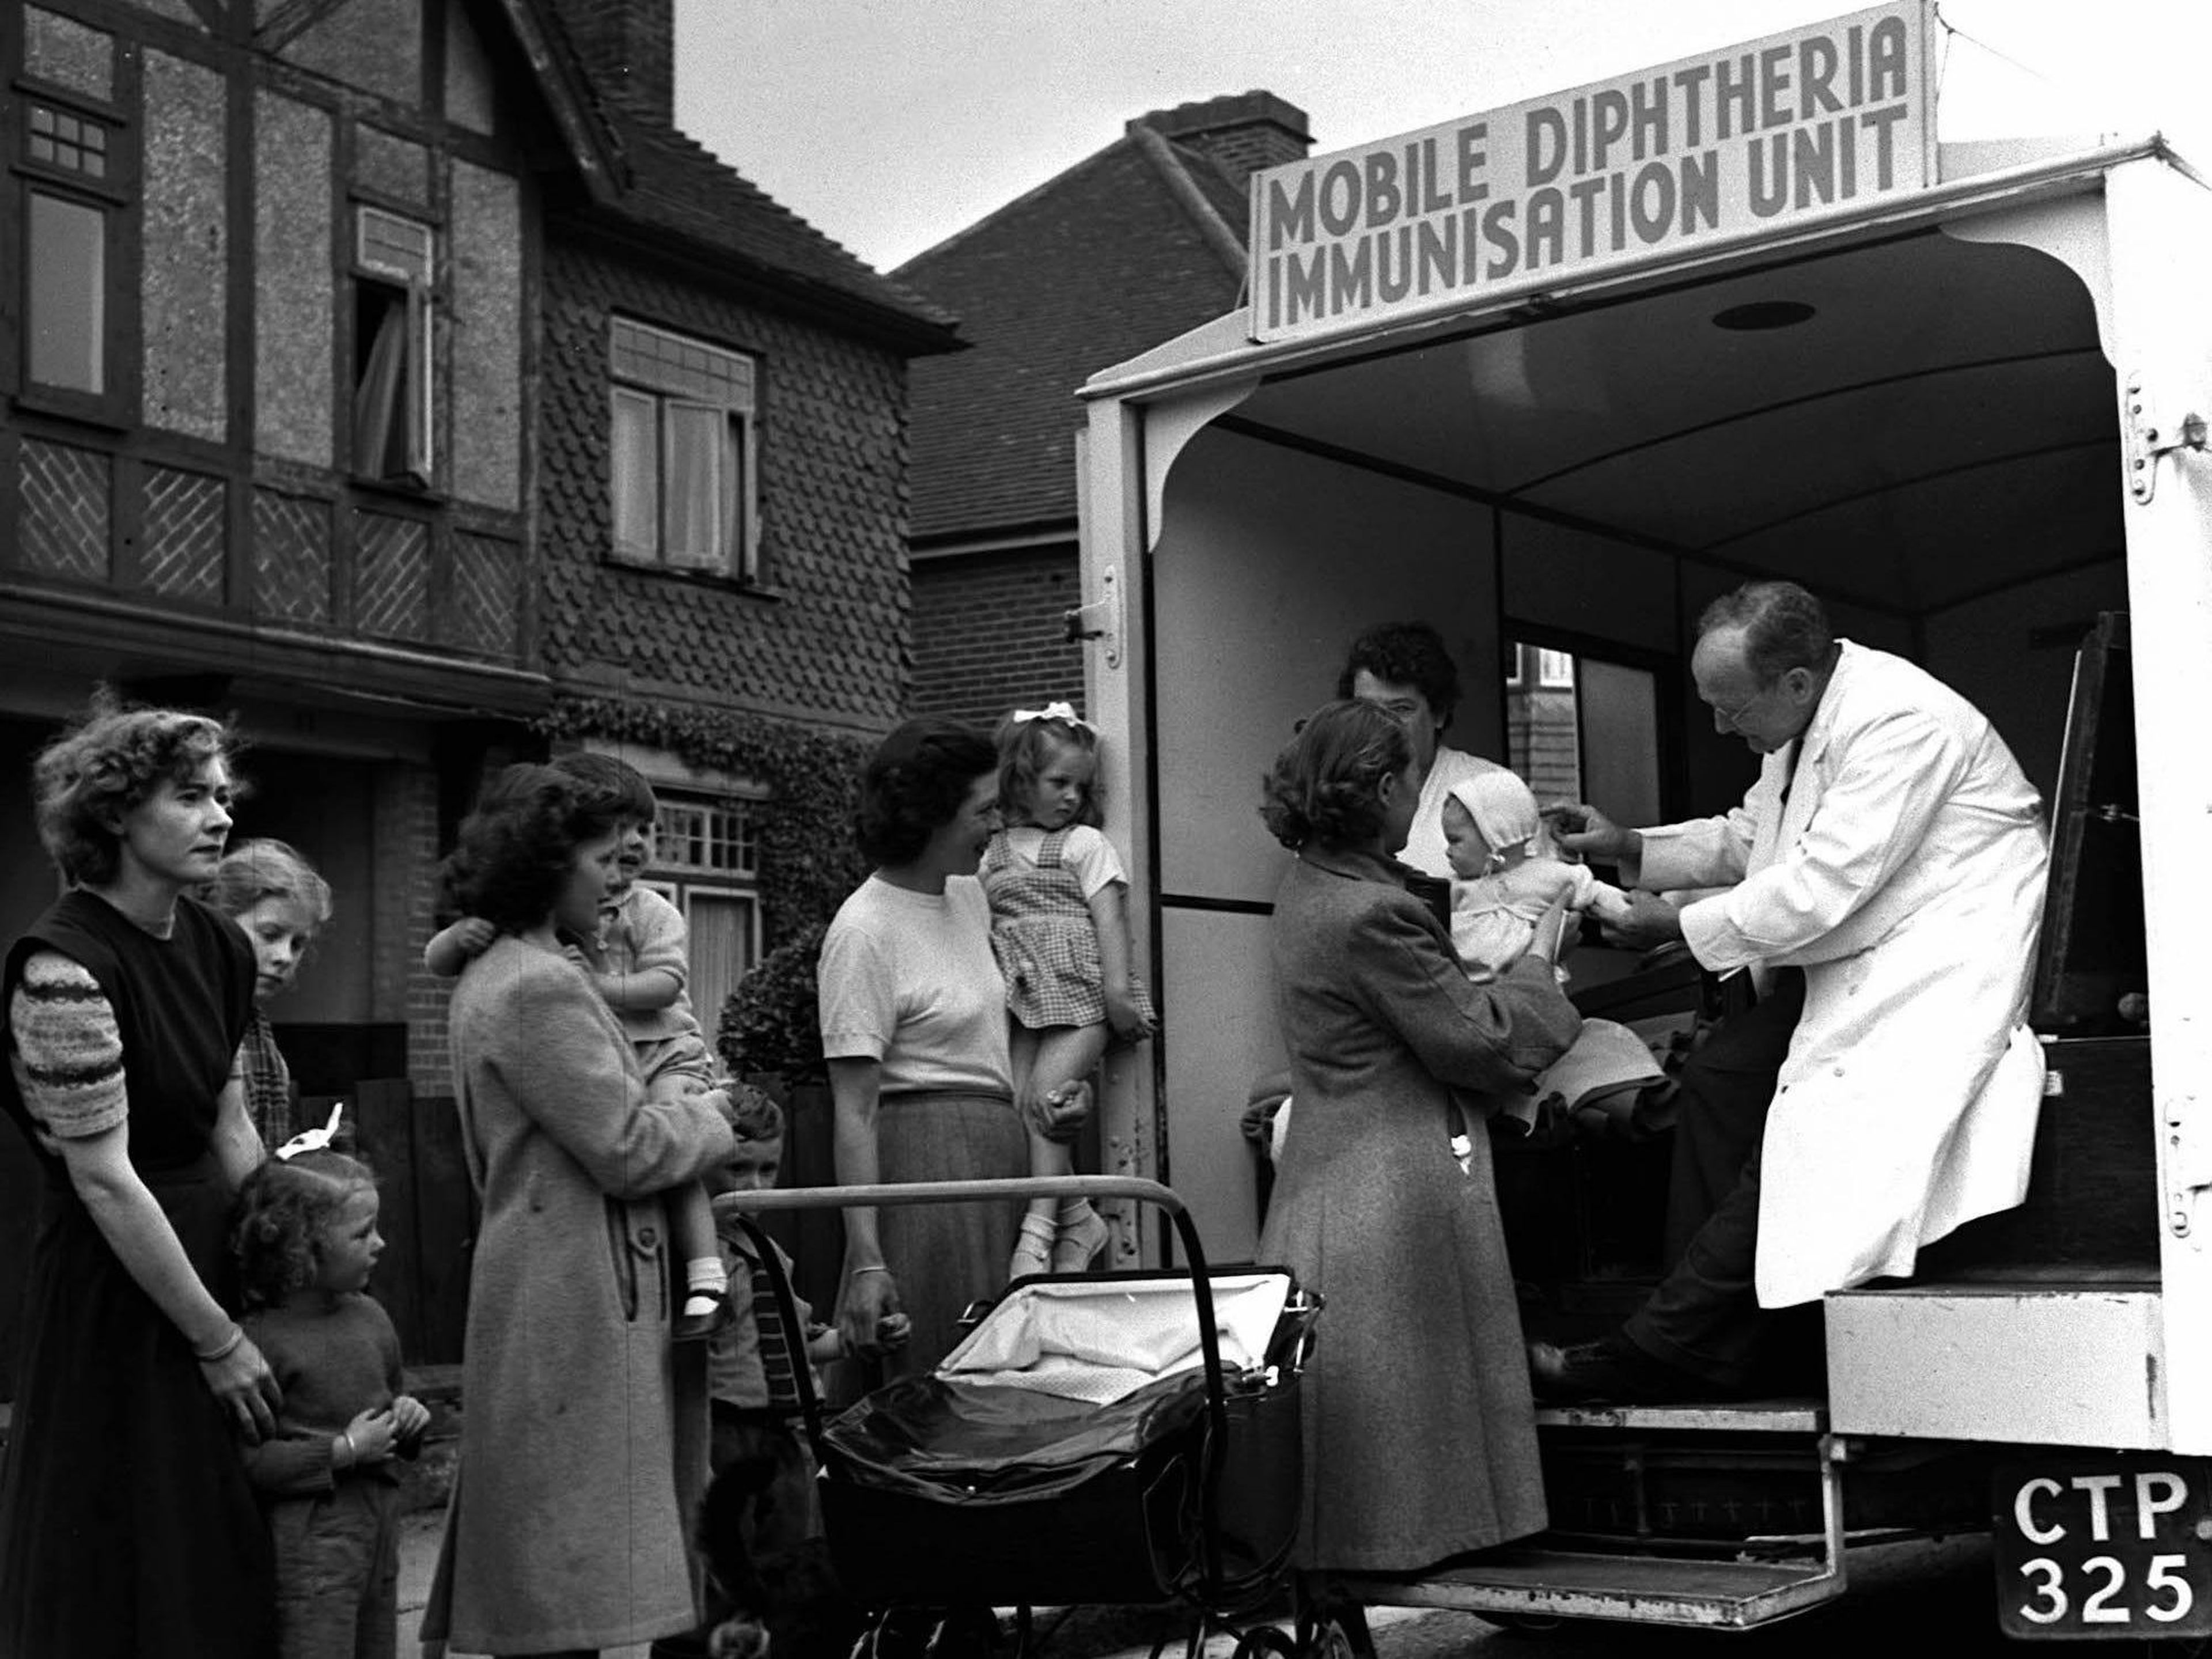 The UK National Health Service at work in Portsmouth, where mobile immunization vans like this one helped reduced the risk of diphtheria cases from 776 twenty years prior to 1 in 1950. Doctors gave more than 37,000 various injections.